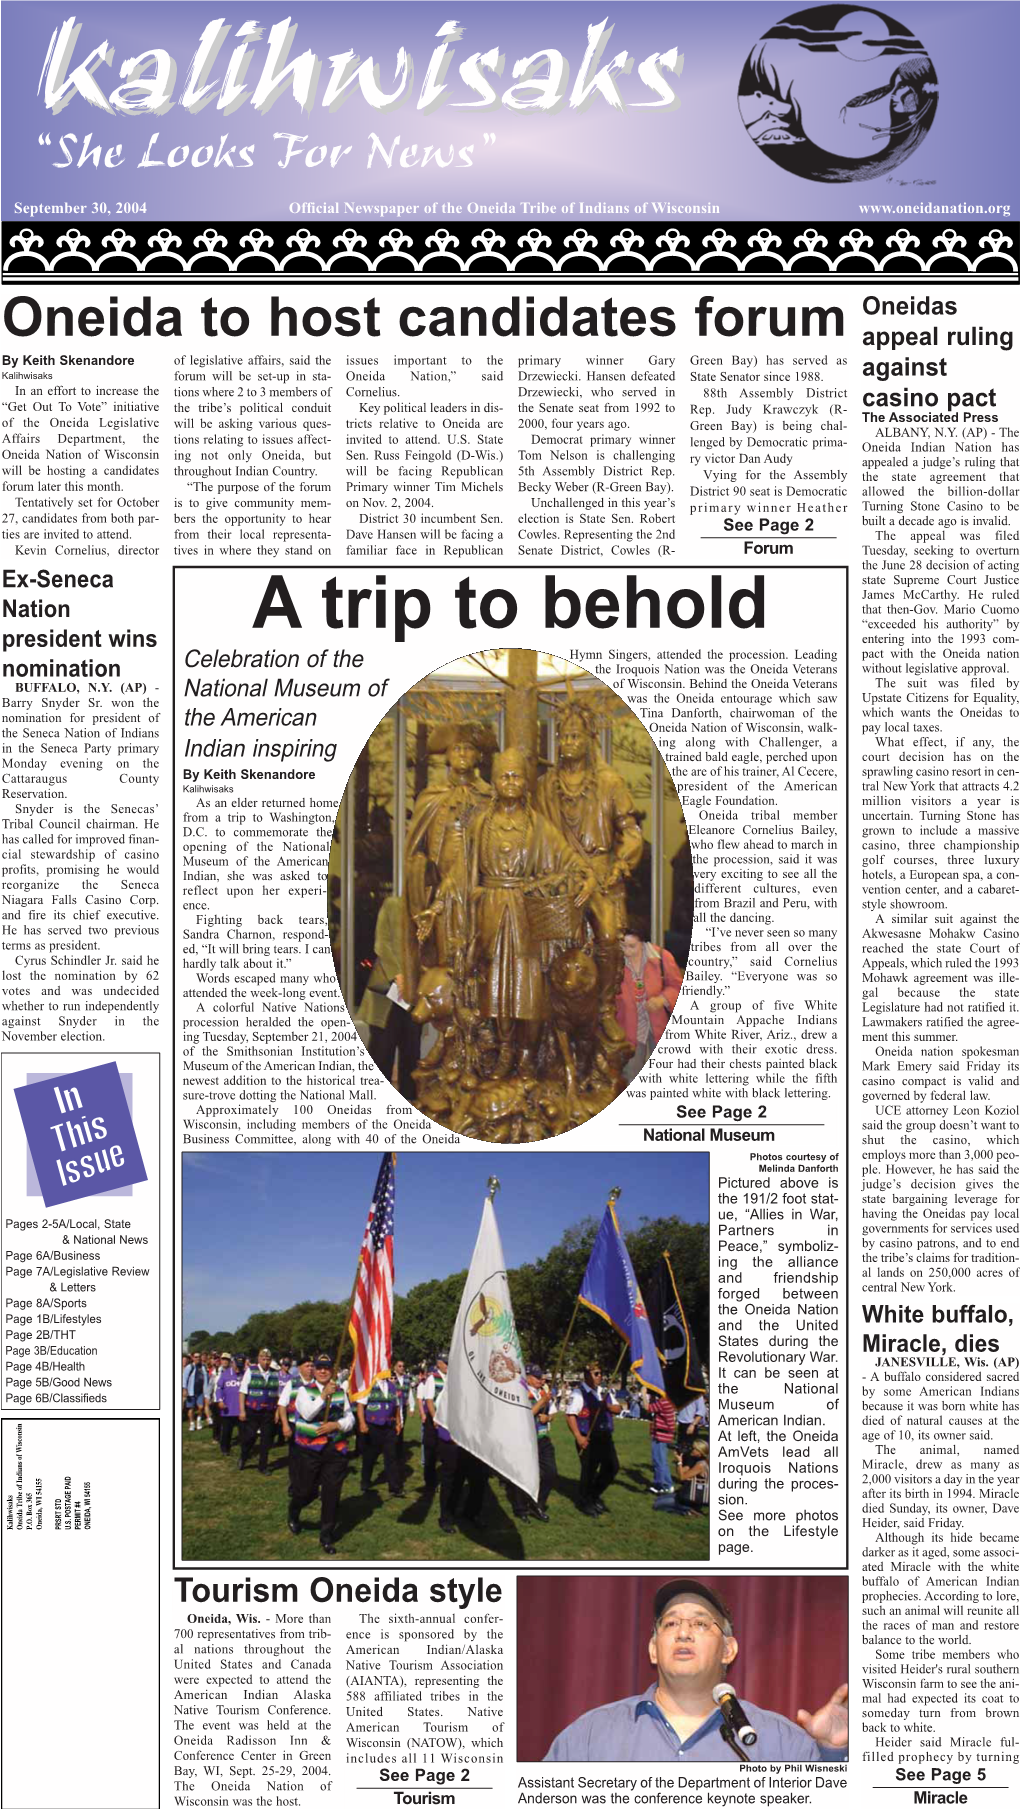 September 30, 2004 Official Newspaper of the Oneida Tribe of Indians of Wisconsin